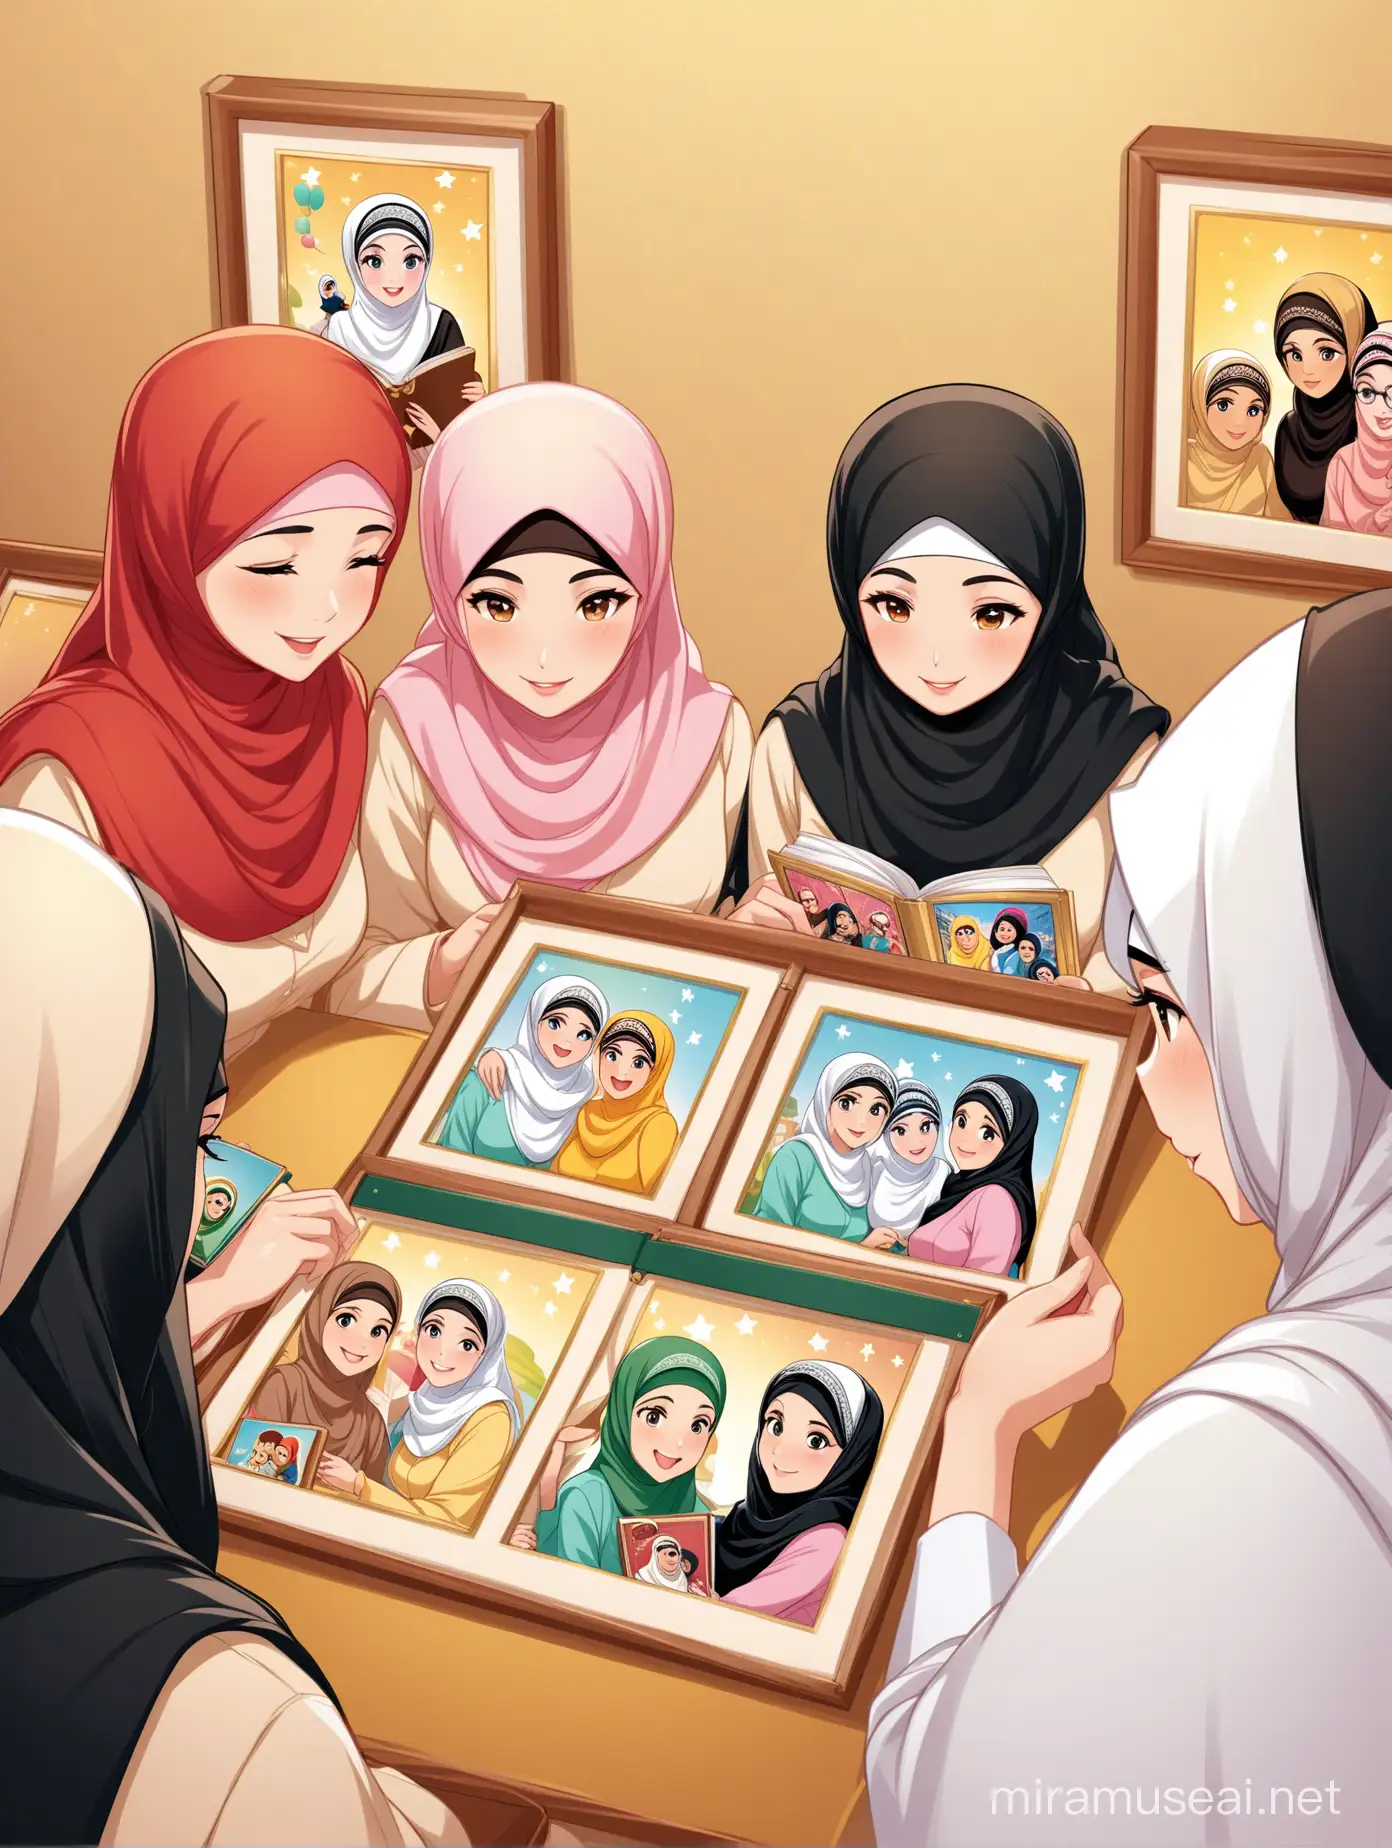 A group of Muslim women looking at photos and photo albums and photo frames in Disney cartoon format with customer club discount elements